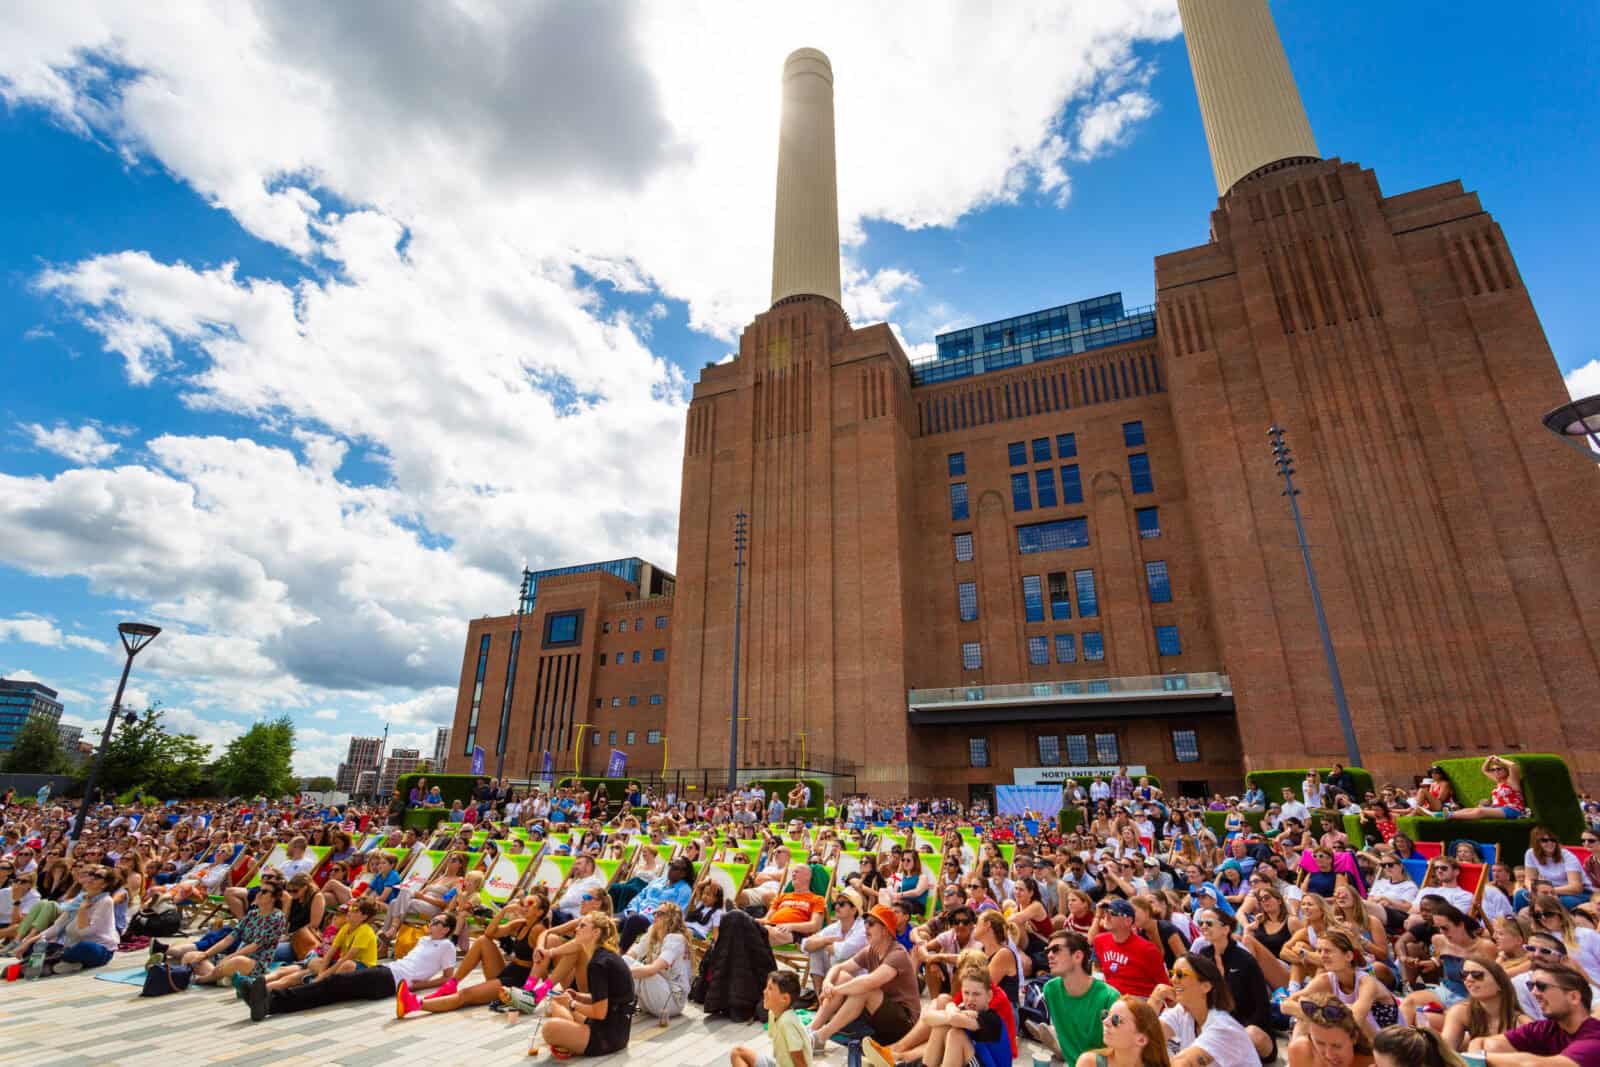 Game on!  The Battersea Games return to Battersea Power Station in a big way this summer